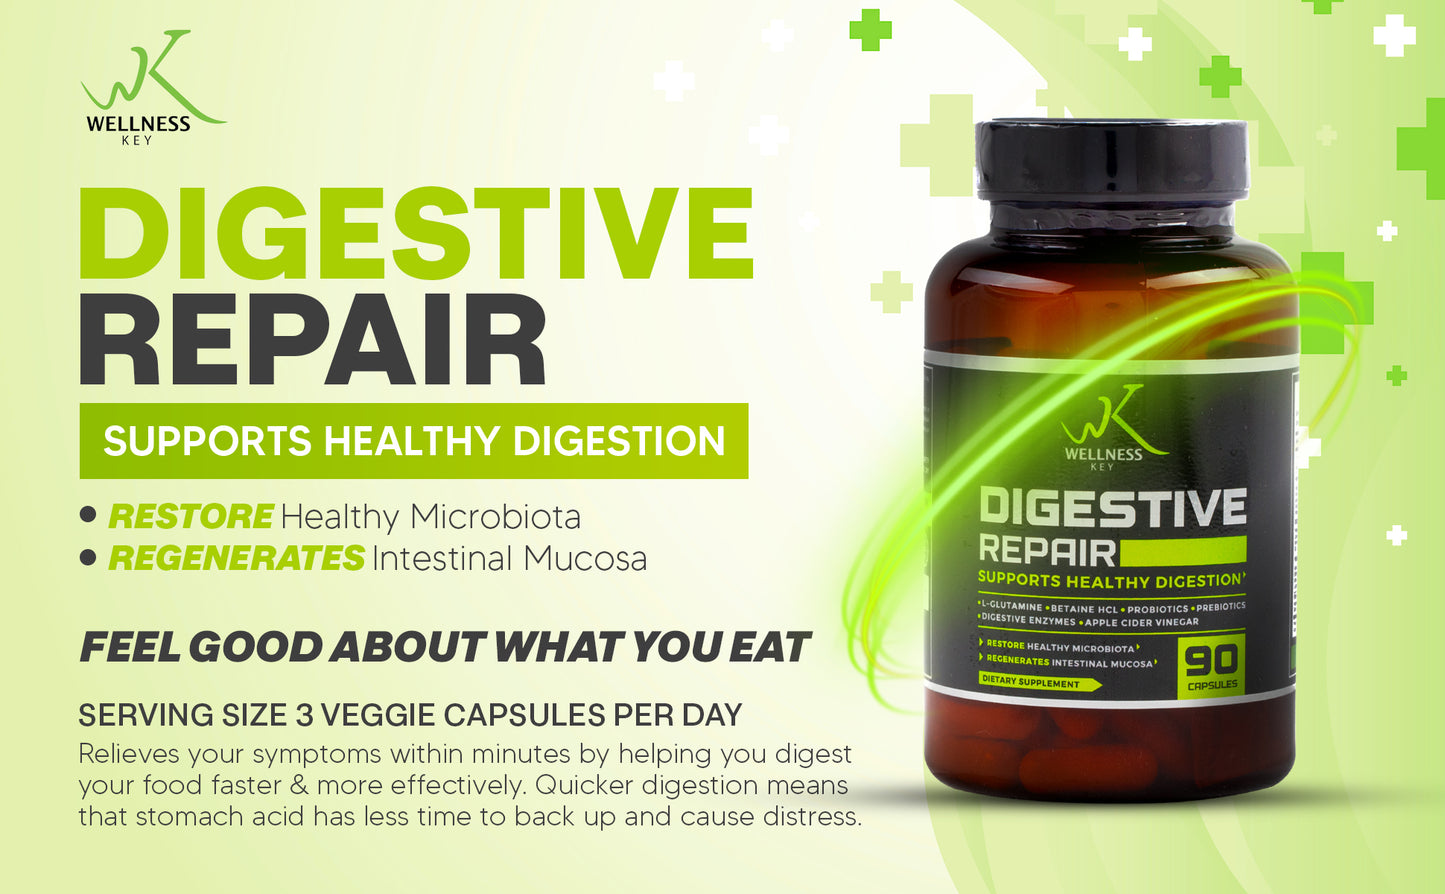 Digestive Repair by Wellness Key| Repairs and Restores Gut Health | Aids with Digestion and Improves Digestive Function | No Bloating | Natural Ingredients | 90 Capsules